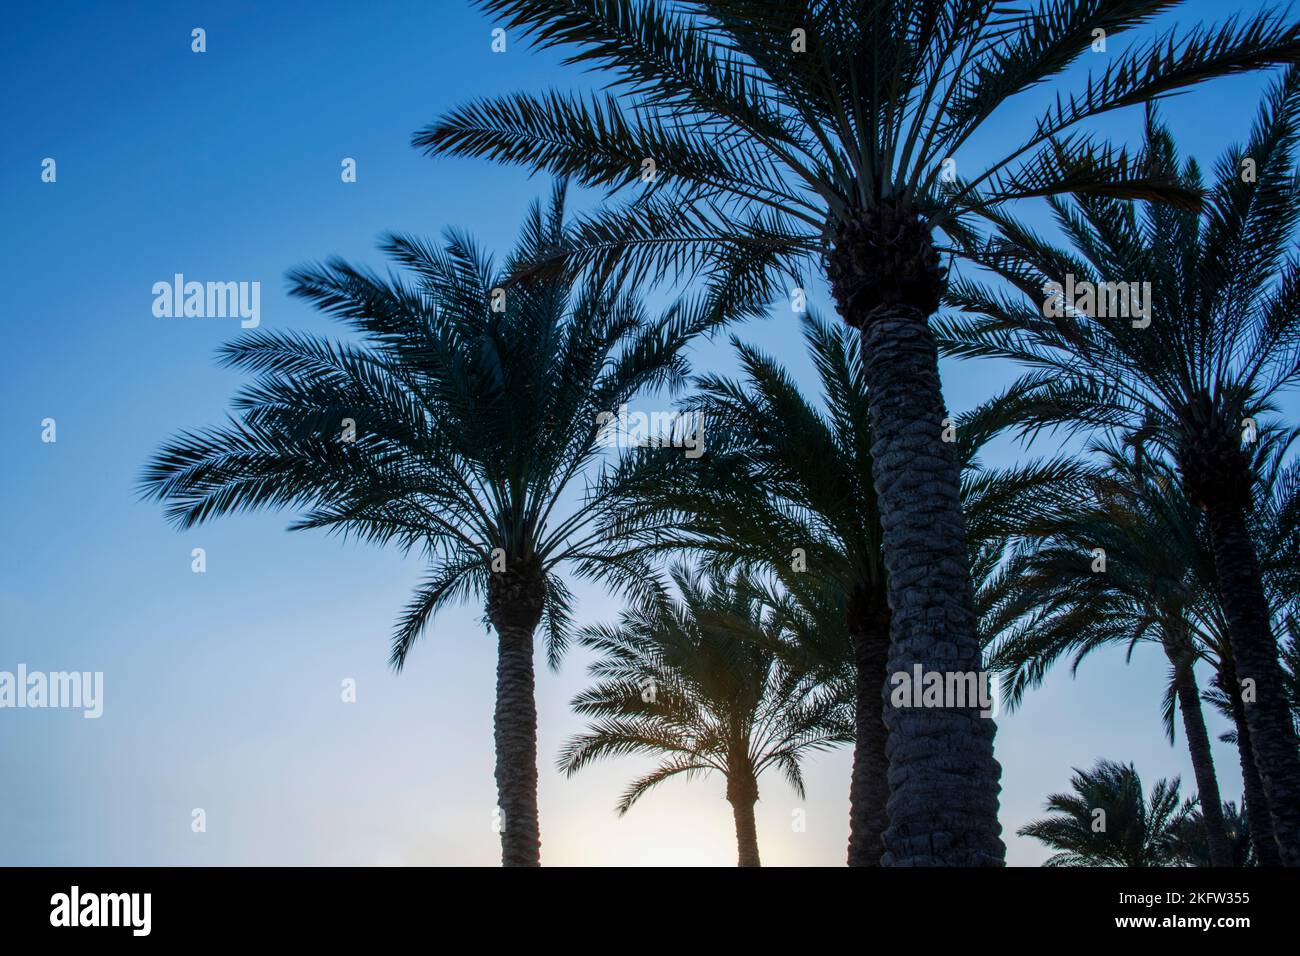 Many palm trees to rember an amazing travel and the relaxing holidays Stock Photo